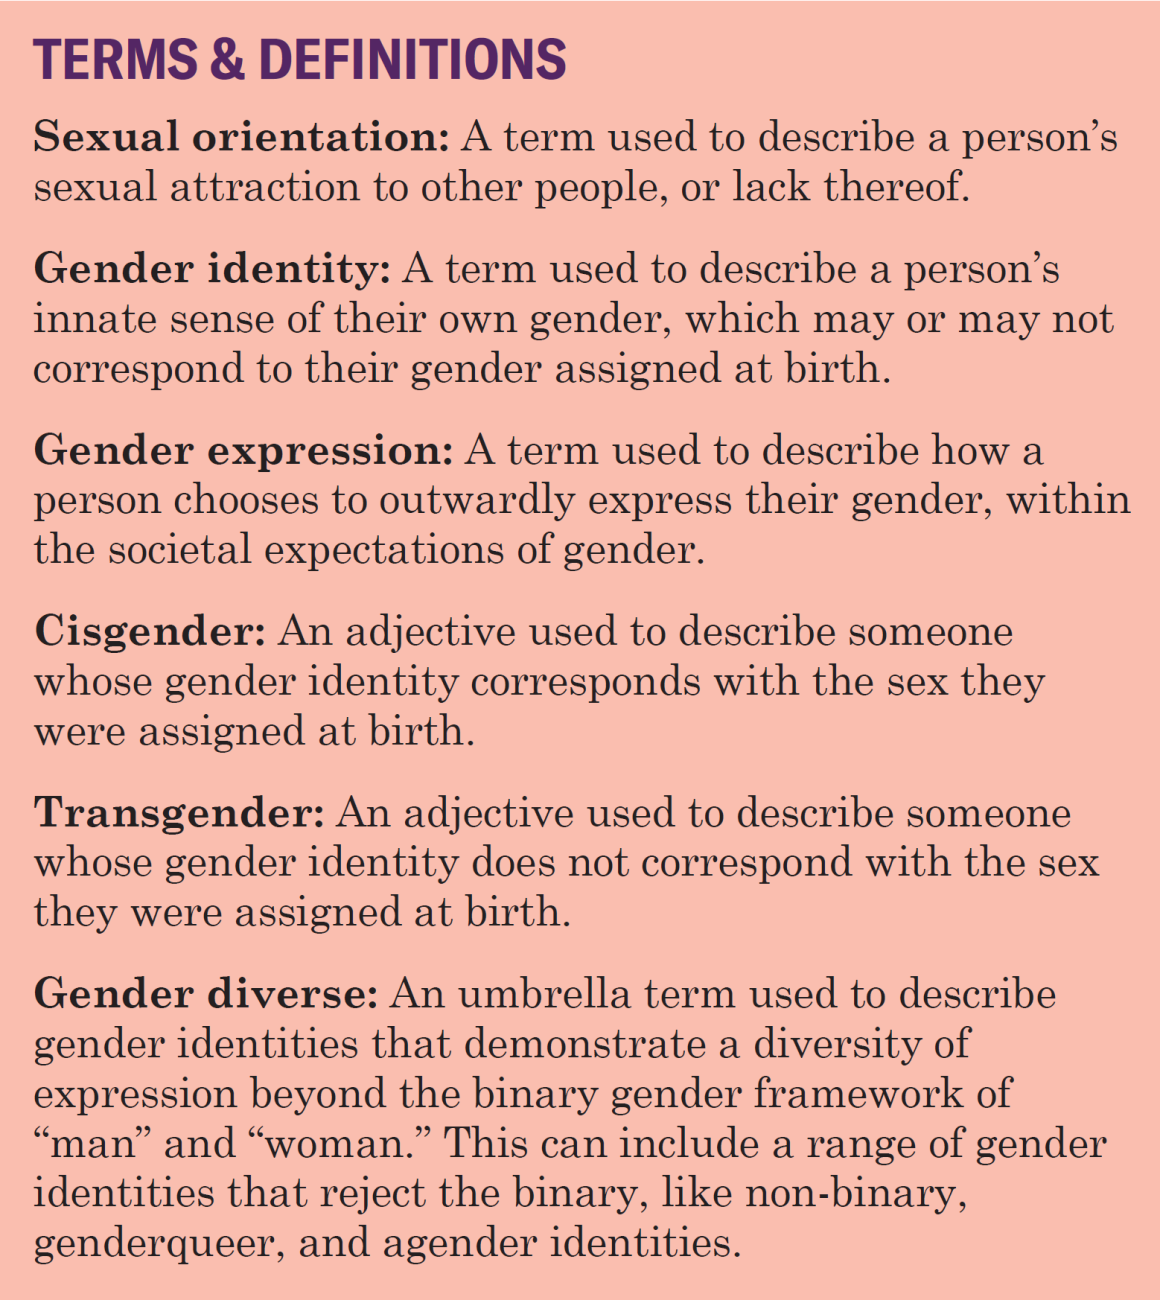 terms and definitions of LGBTQ issues